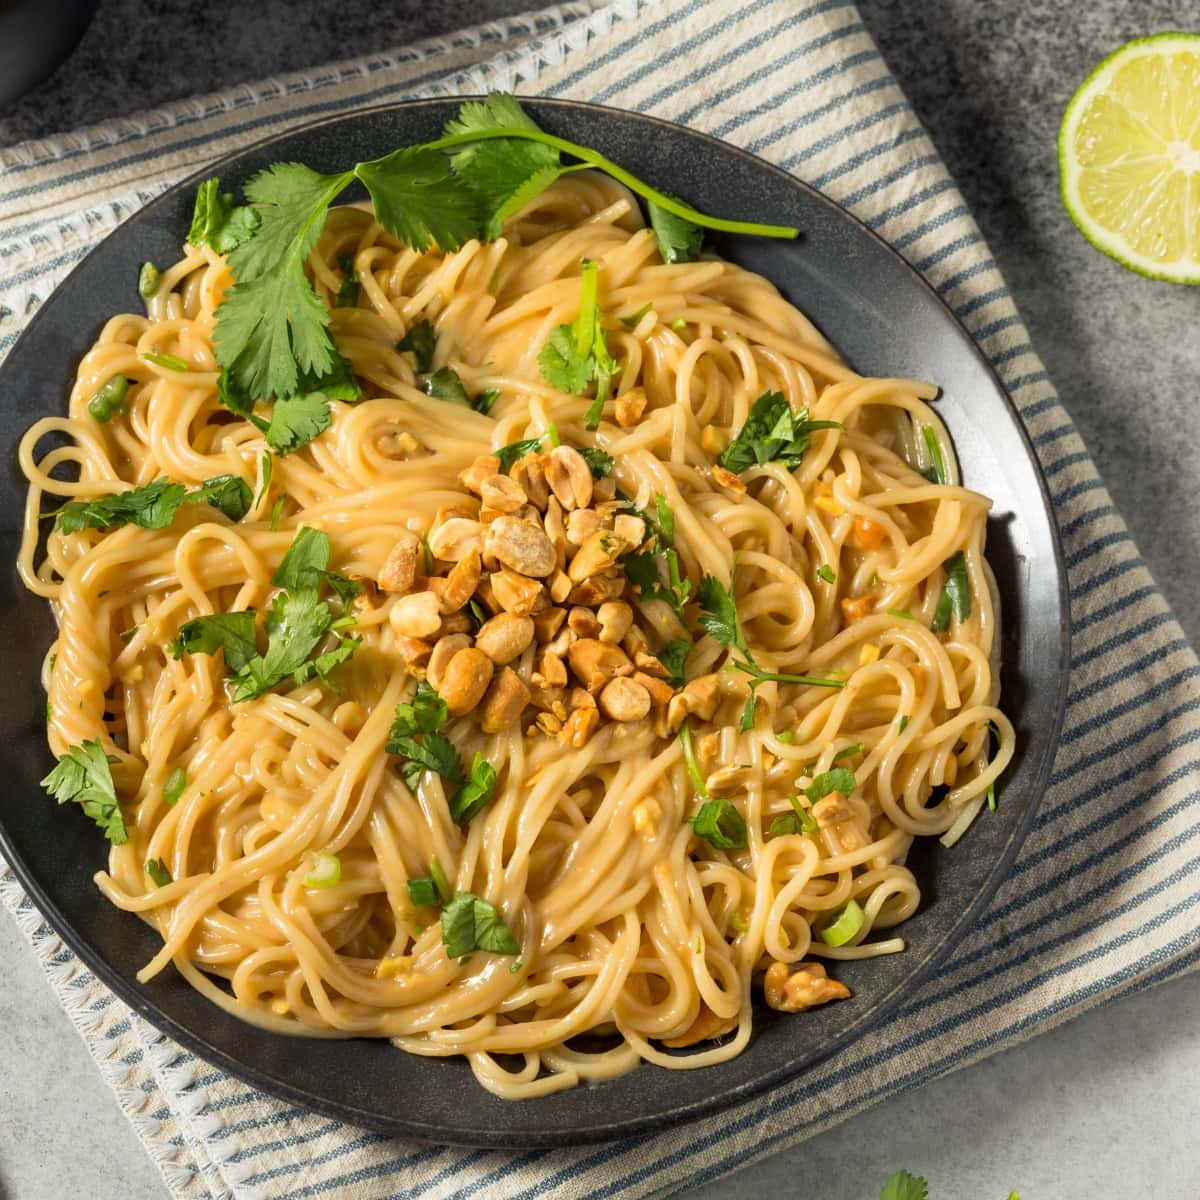 Noodle with peanut sauce served on a black plate garnished with chopped nuts and cilantro leaves.